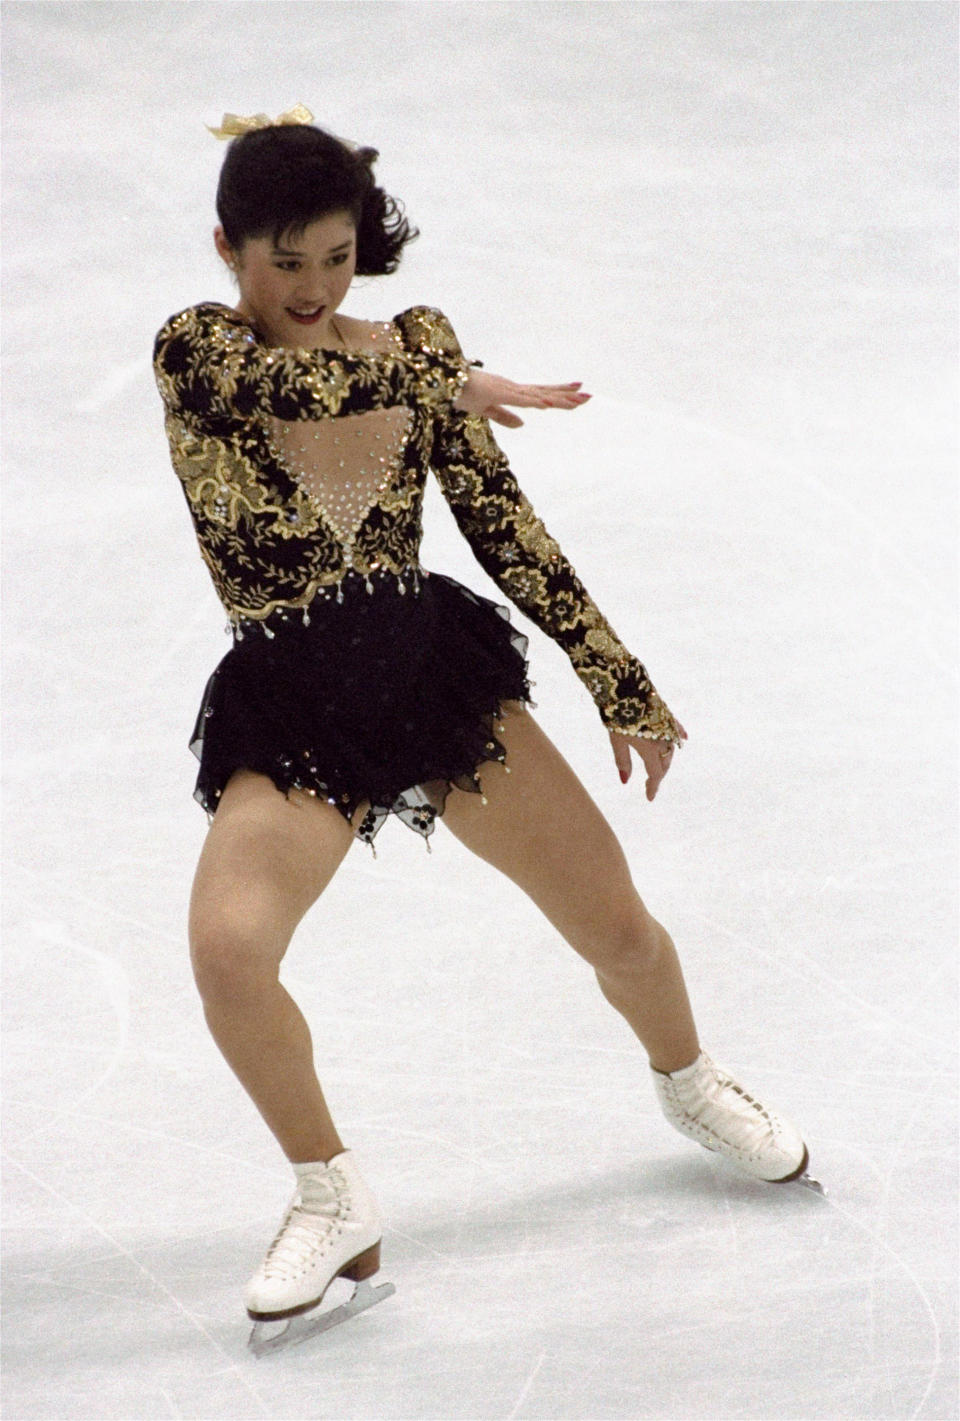 FILE - Kristi Yamaguchi of the U.S. skates in the free skating portion of the women's figure skating competition at the XVI Winter Olympic Games in Albertville, France on Friday, Feb. 21, 1992. The Fremont, Calif., woman won the women's gold medal. (AP Photo/Lionel Cironneau, File)